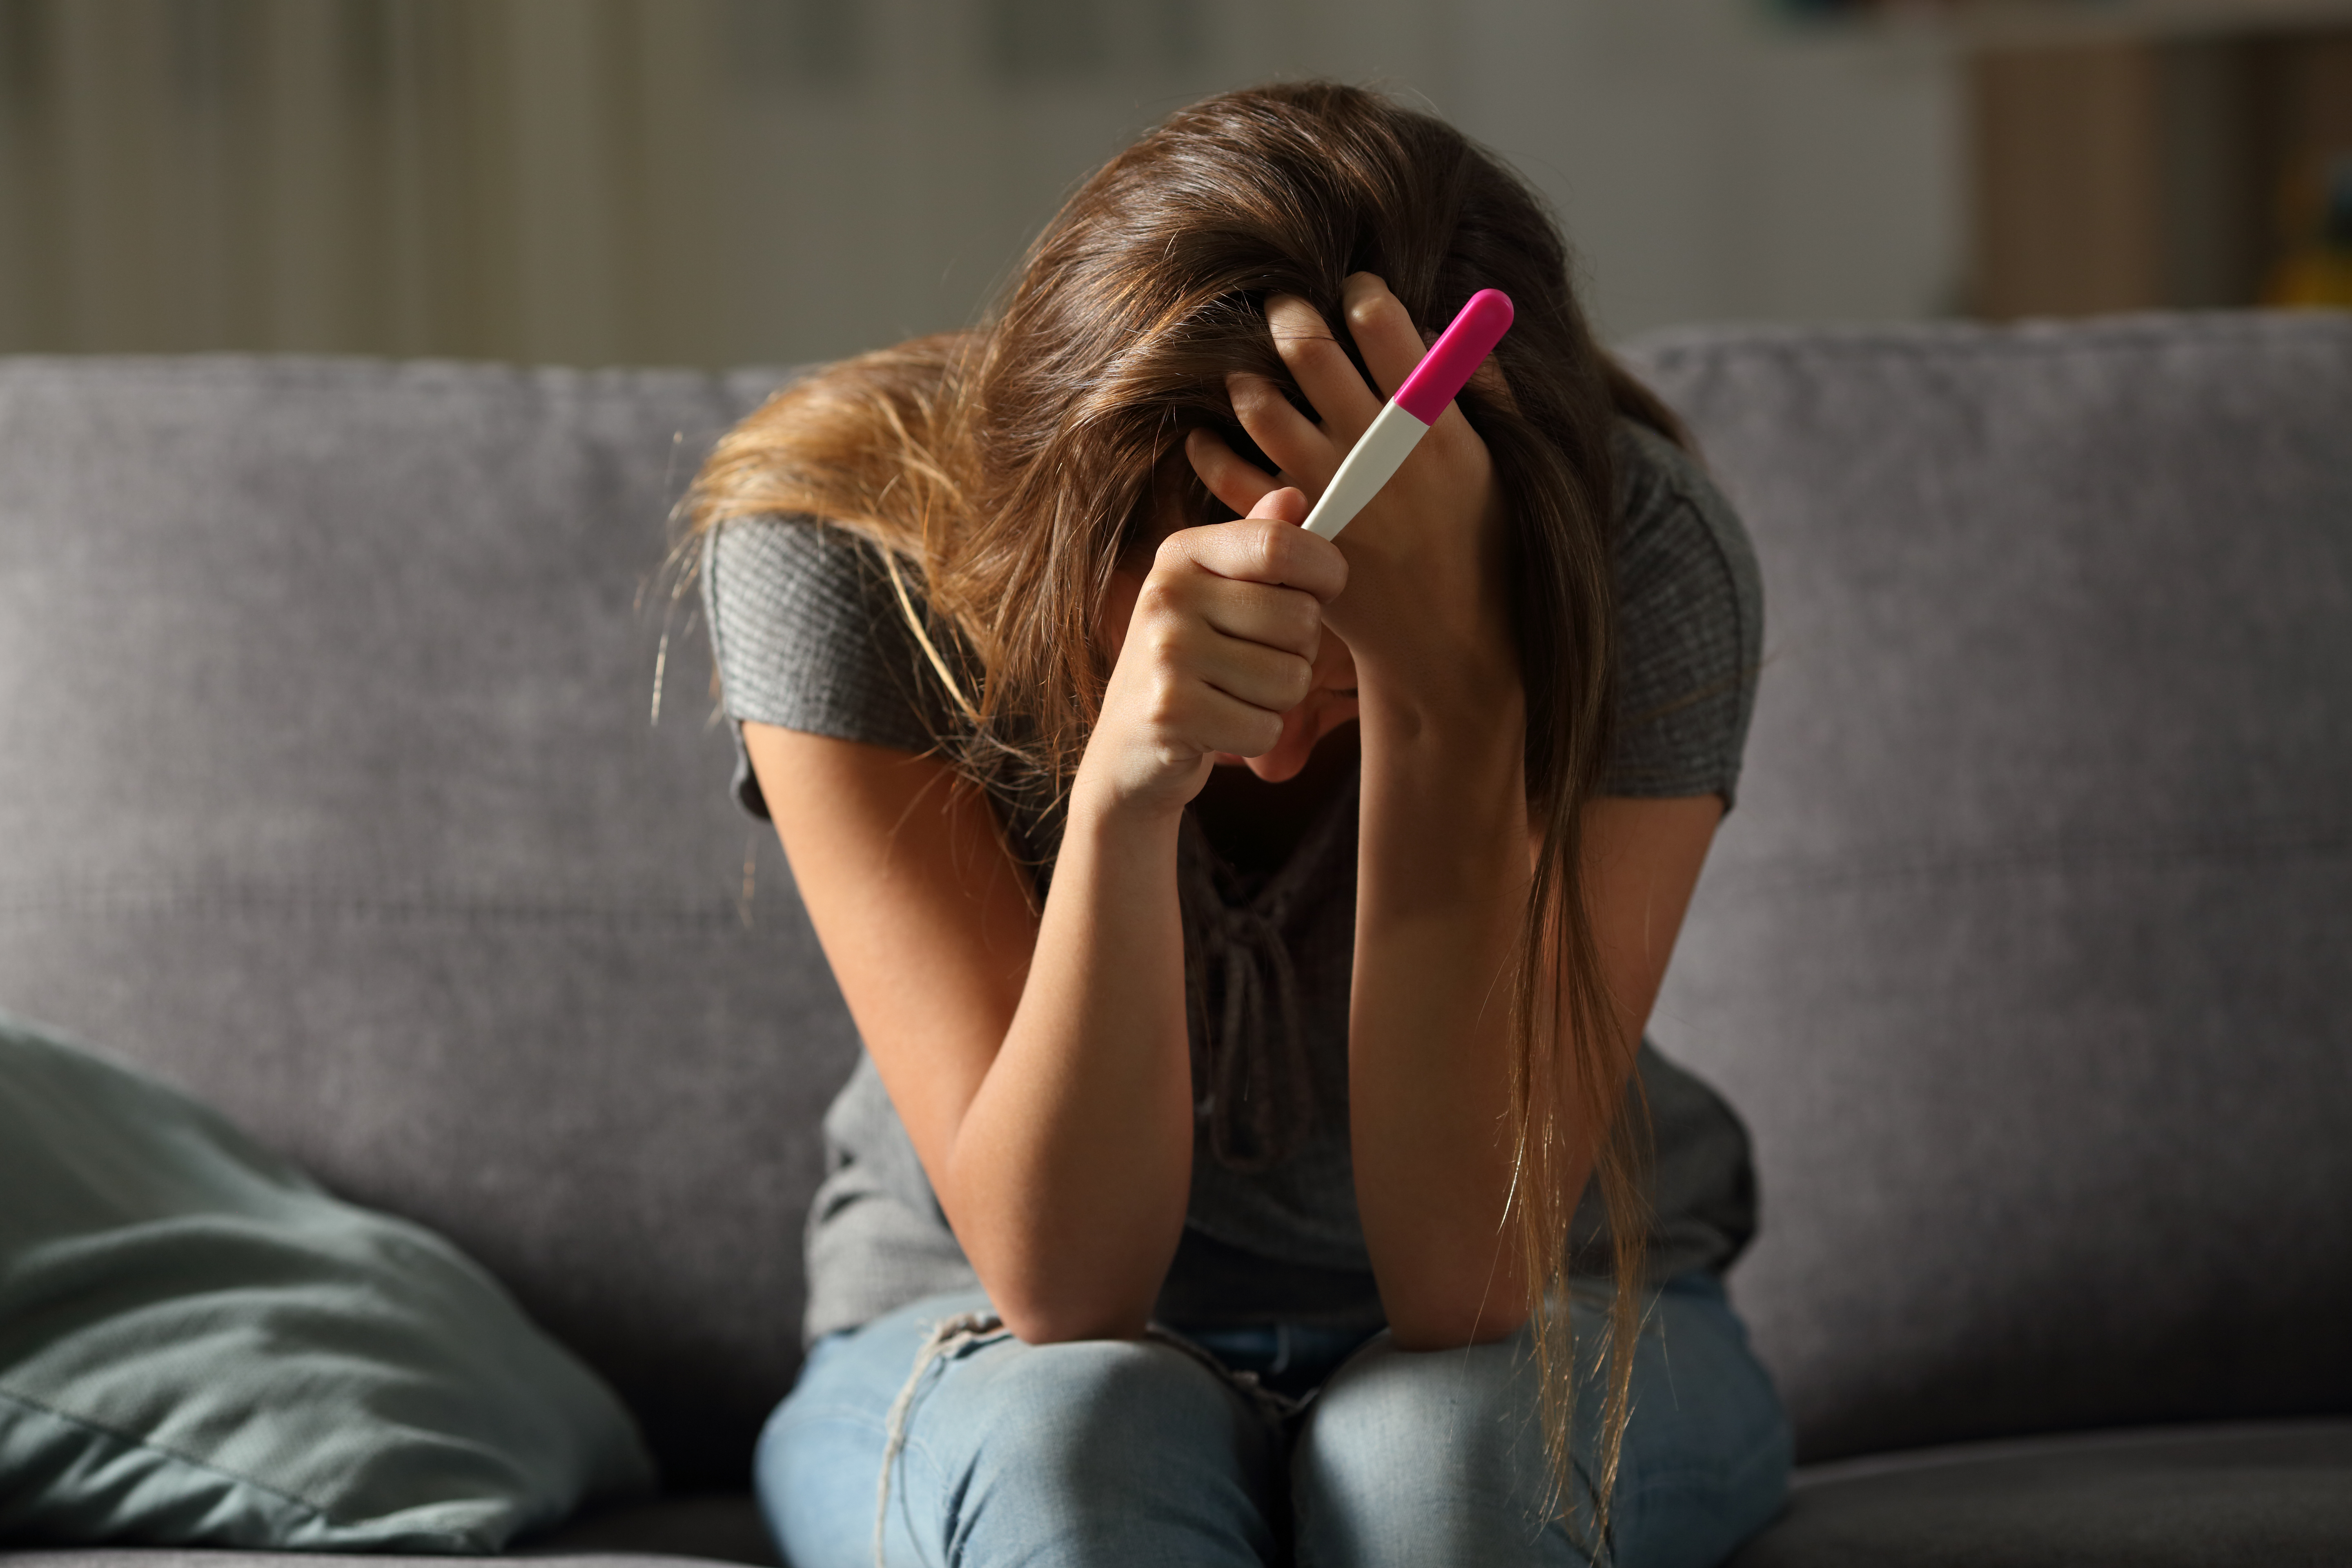 Lonely sad woman with pregnancy test | Source: Shutterstock.com